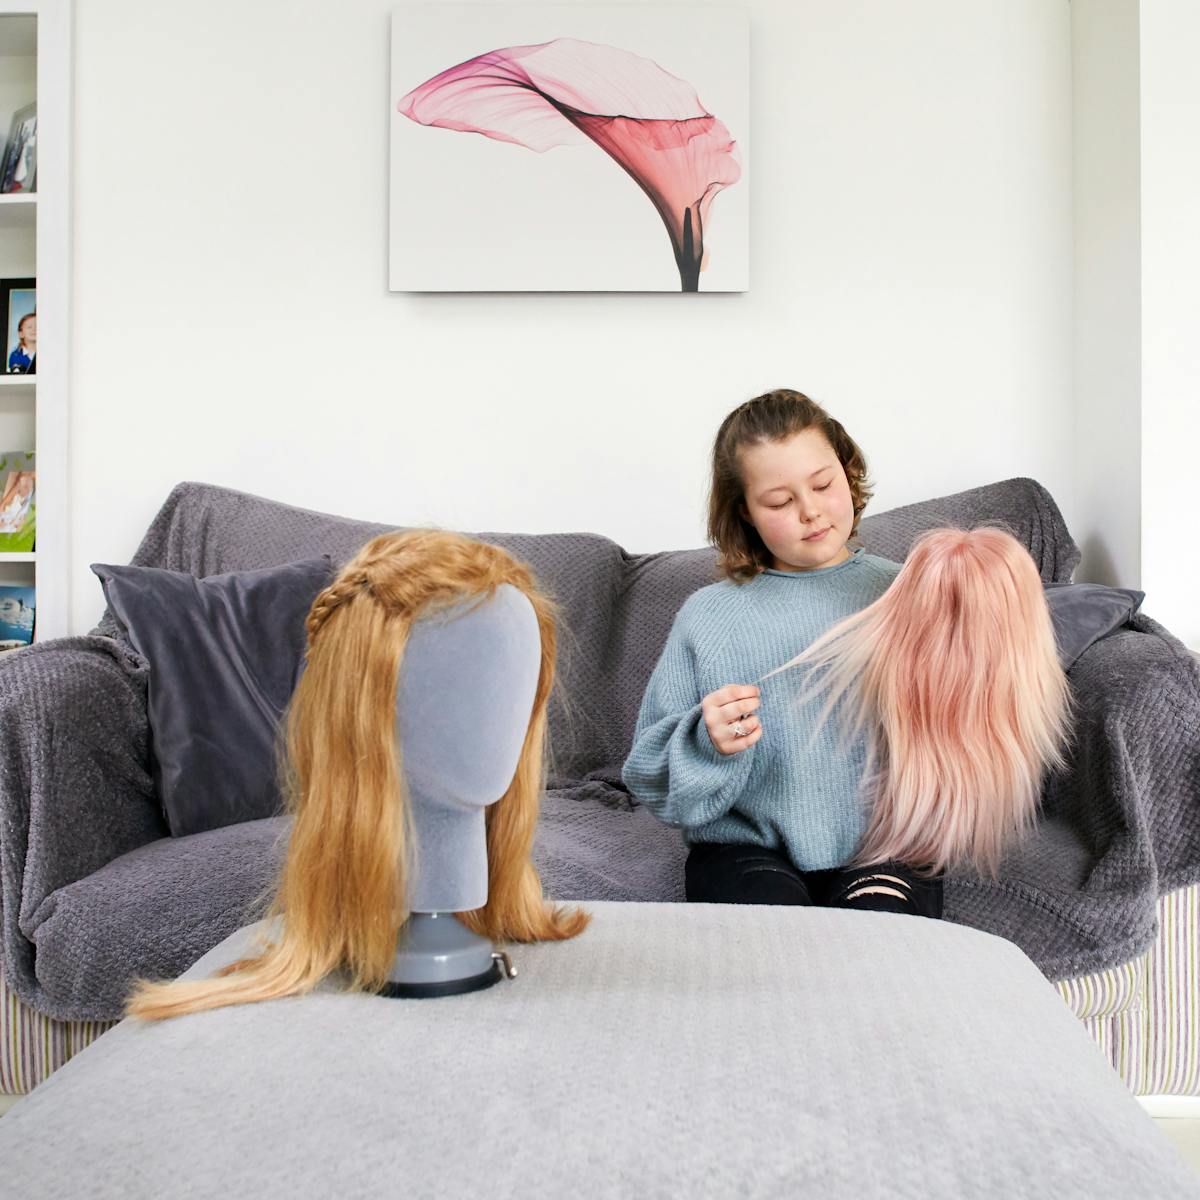 Photograph of a young girl in her living room, sat on a sofa. She is wearing a knitted grey jumper and ripped black jeans. She is holding a straight haired pink wig in her left hand and stretching out a few strands of hair with her right hand. She is looking down towards the wig with a slight smile on her face. In front of her is a foot stool, on which is another wig, this time blonde with a plait. The wig is supported in a mannequin head. Behind the young girl is a wood burning stove, a canvas artwork of a flower and a bookshelf containing DVD and family photographs in frames.